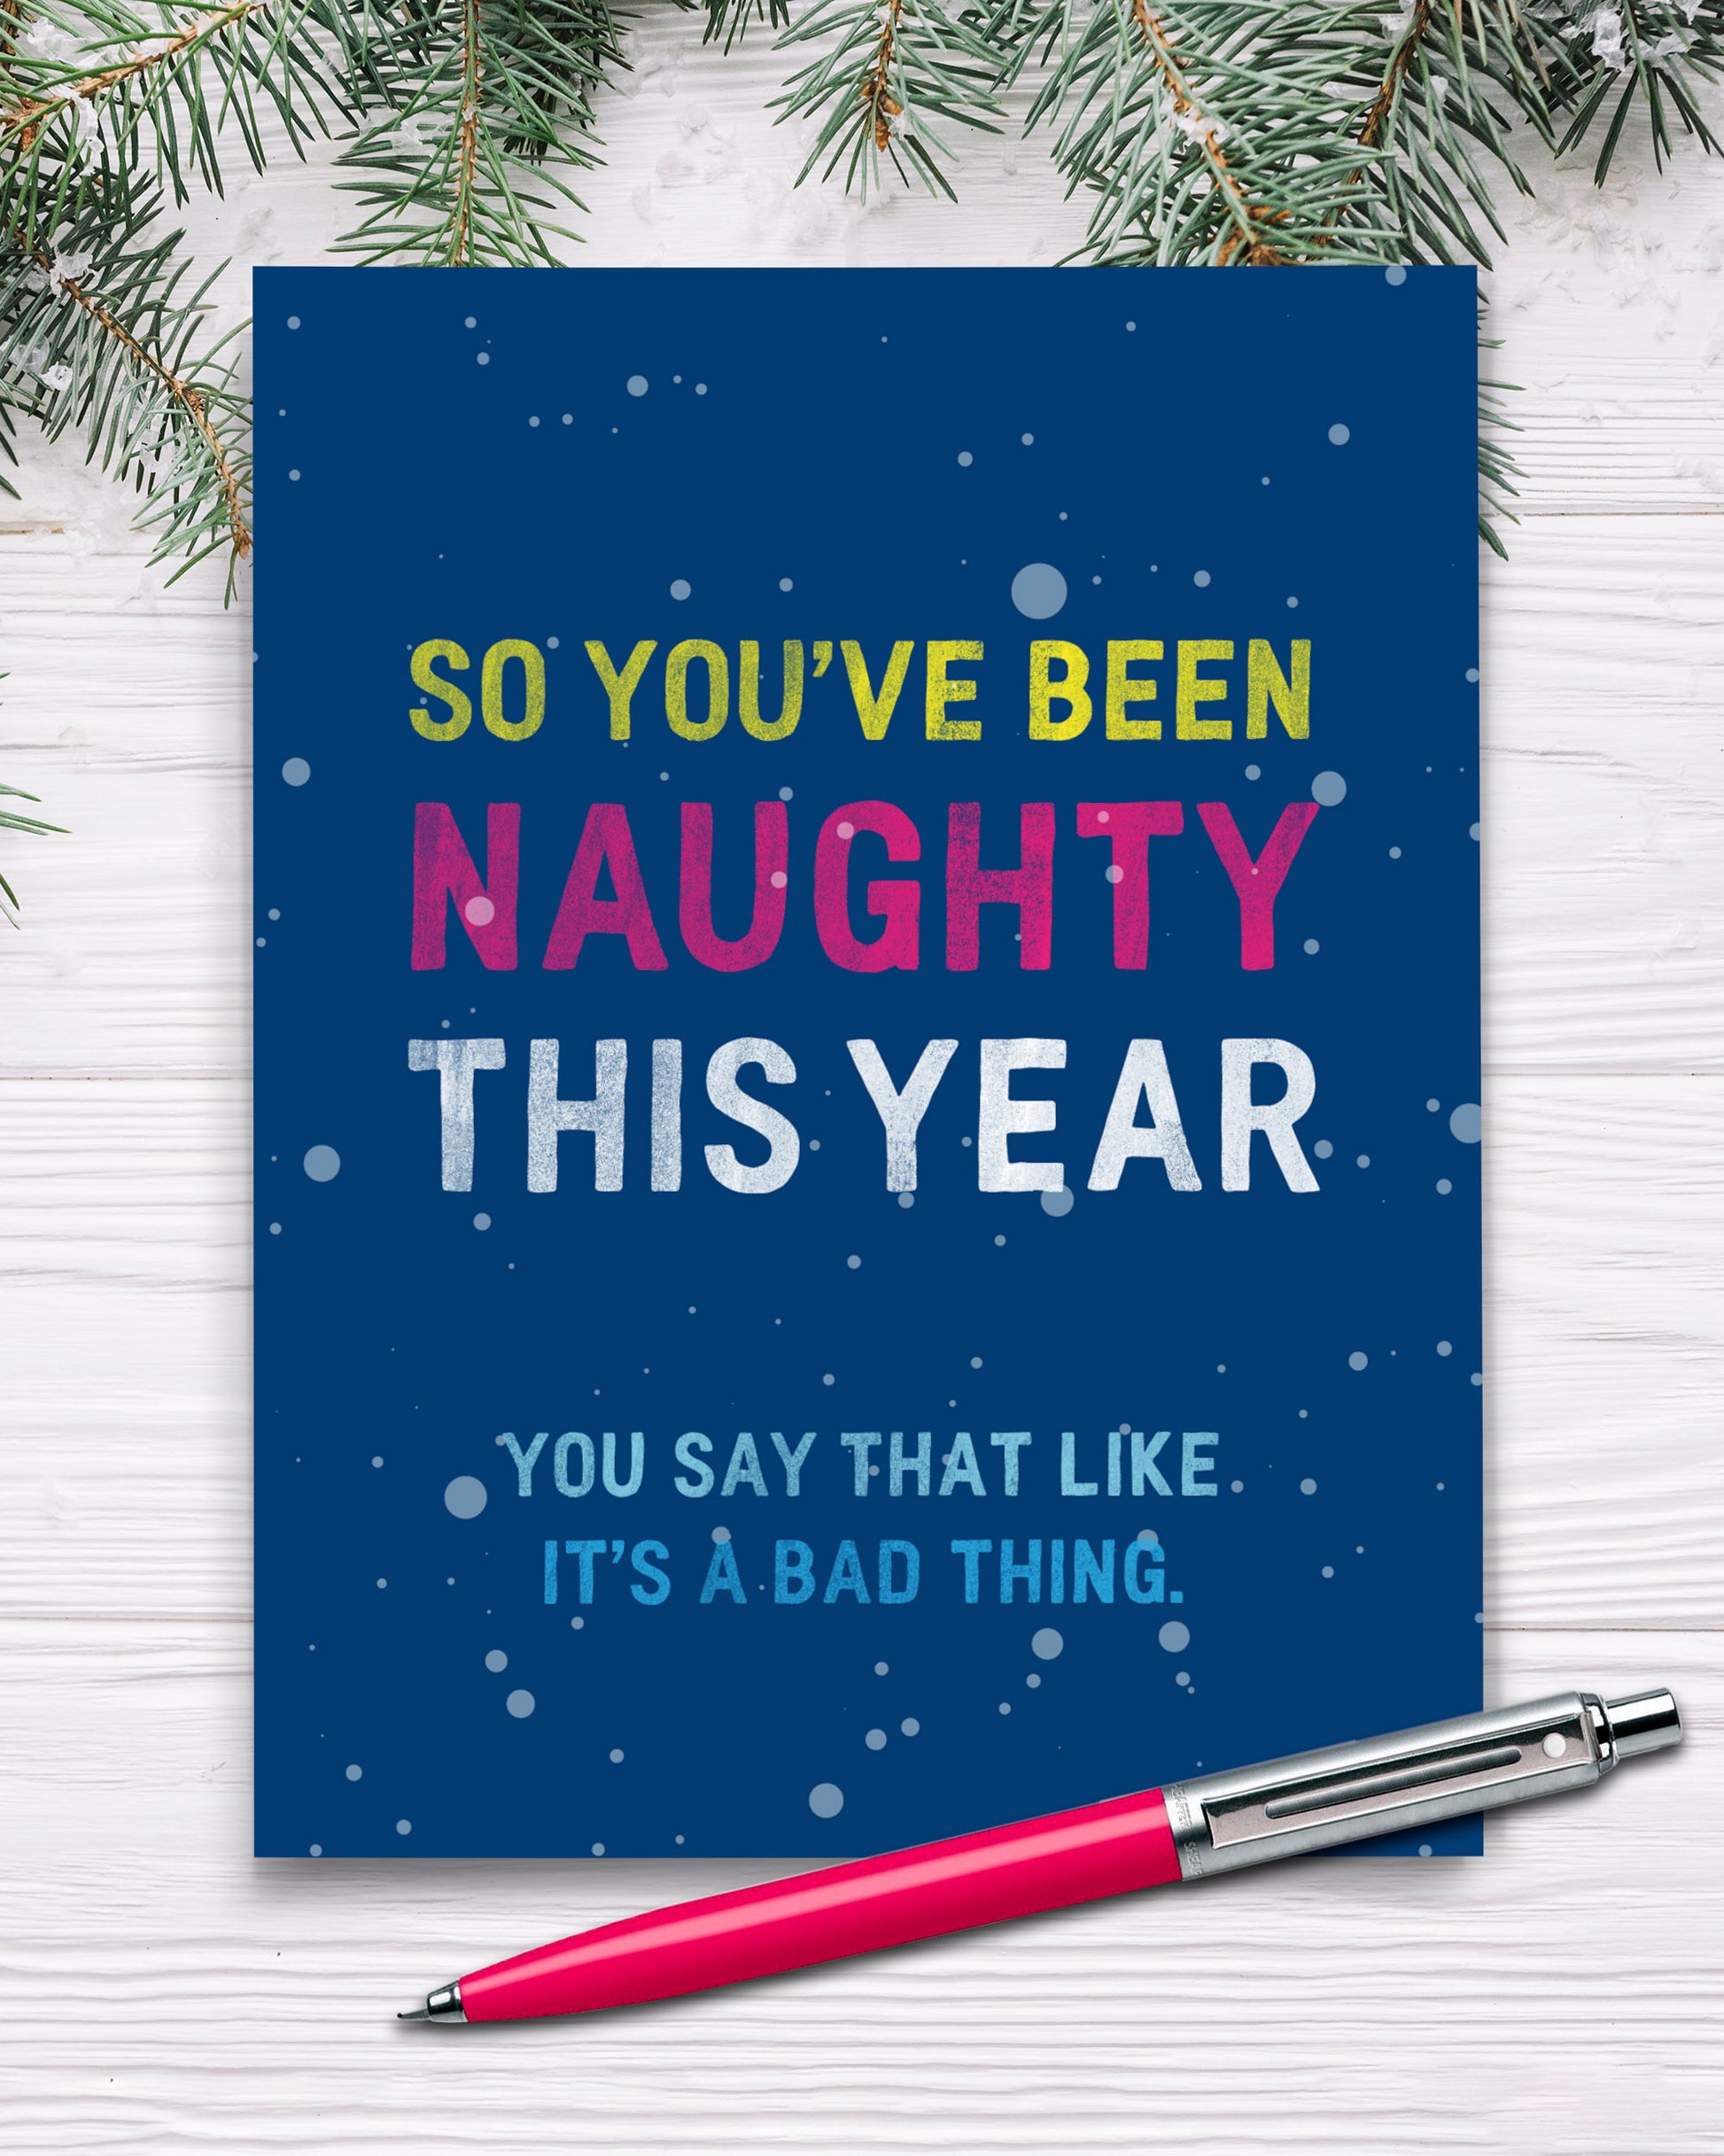 You've Been Naughty Christmas Card, Humorous Christmas Cards by Smirkantile